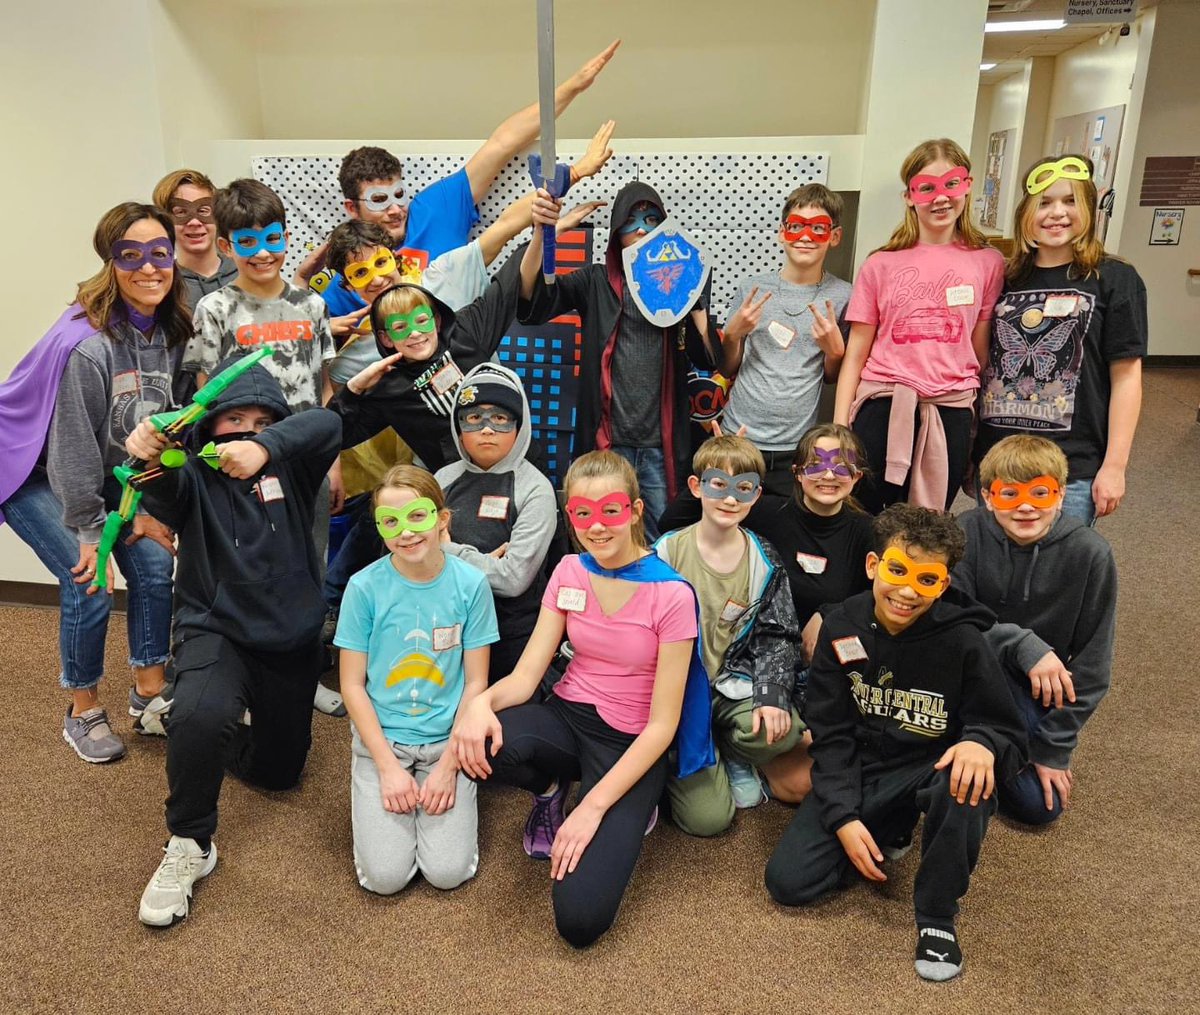 Late post alert: We had a Super Fun time at our Middle School Lock-In last weekend. #ehyouth2024 #middleschoollife